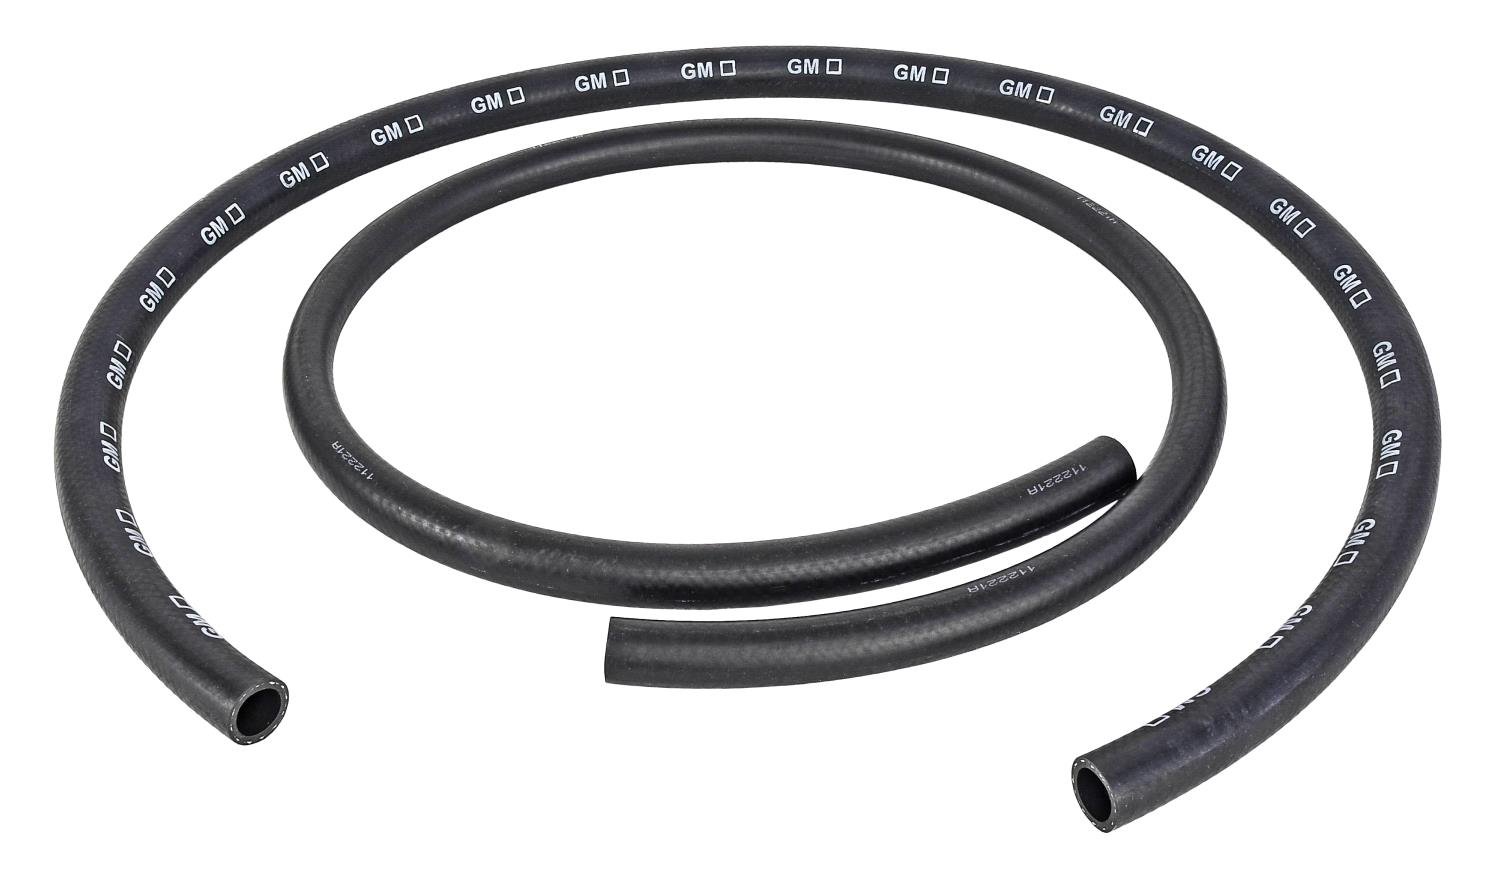 Heater Hose Kit Fits Select 1958-1988 GM Models [Stamped, 3/4 in. & 5/8 in. ID Hoses]